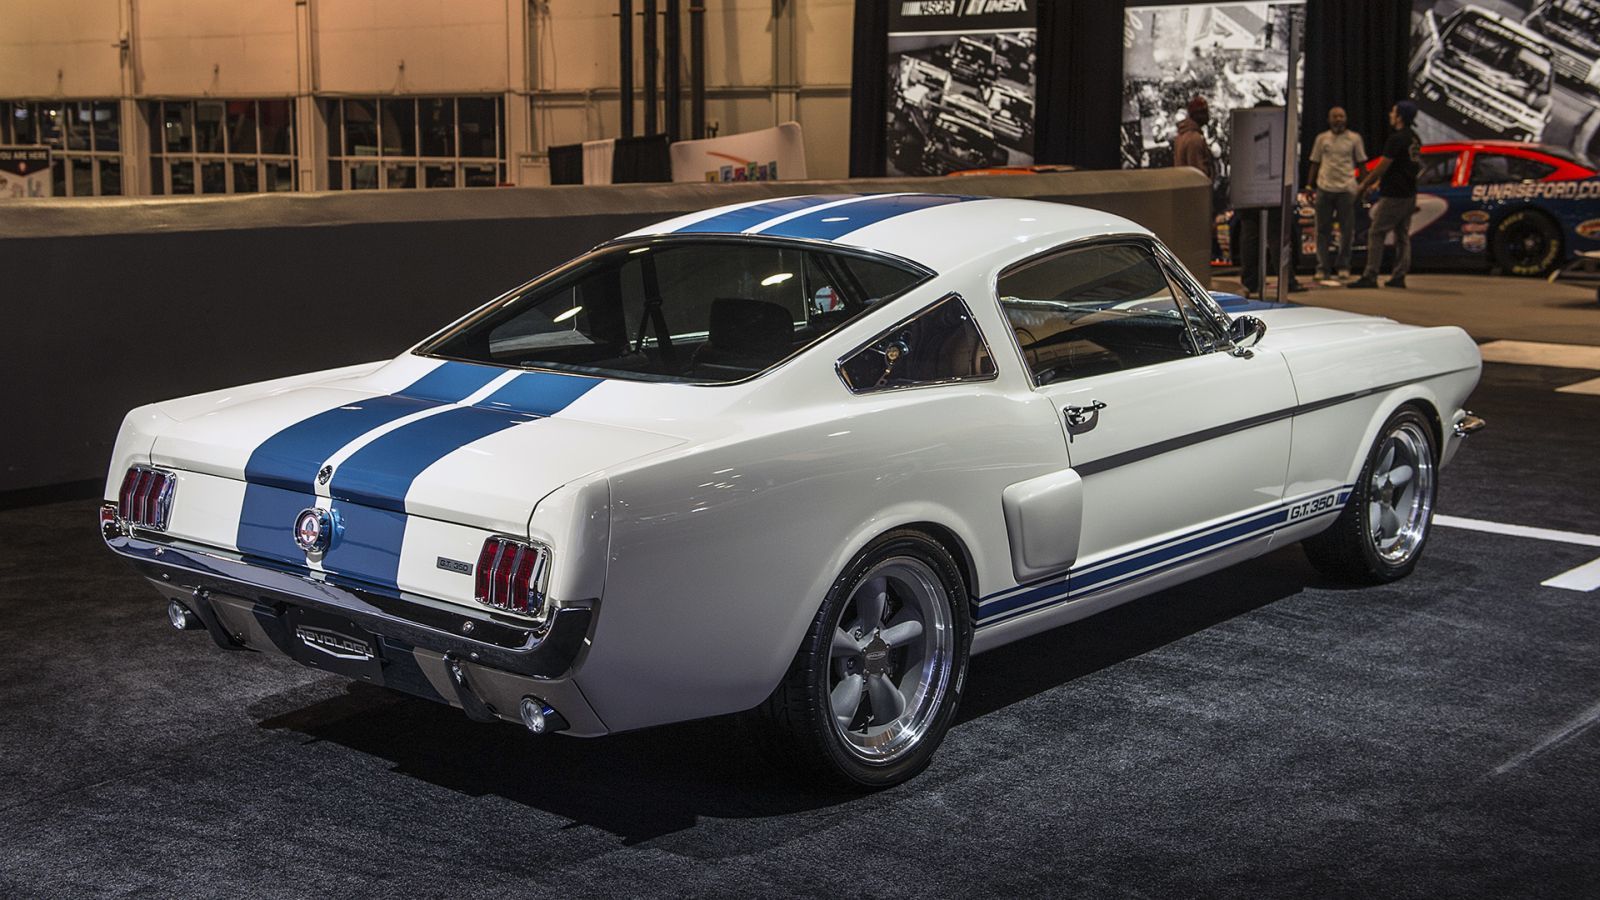 Revology Fod Mustang Shelby GT350